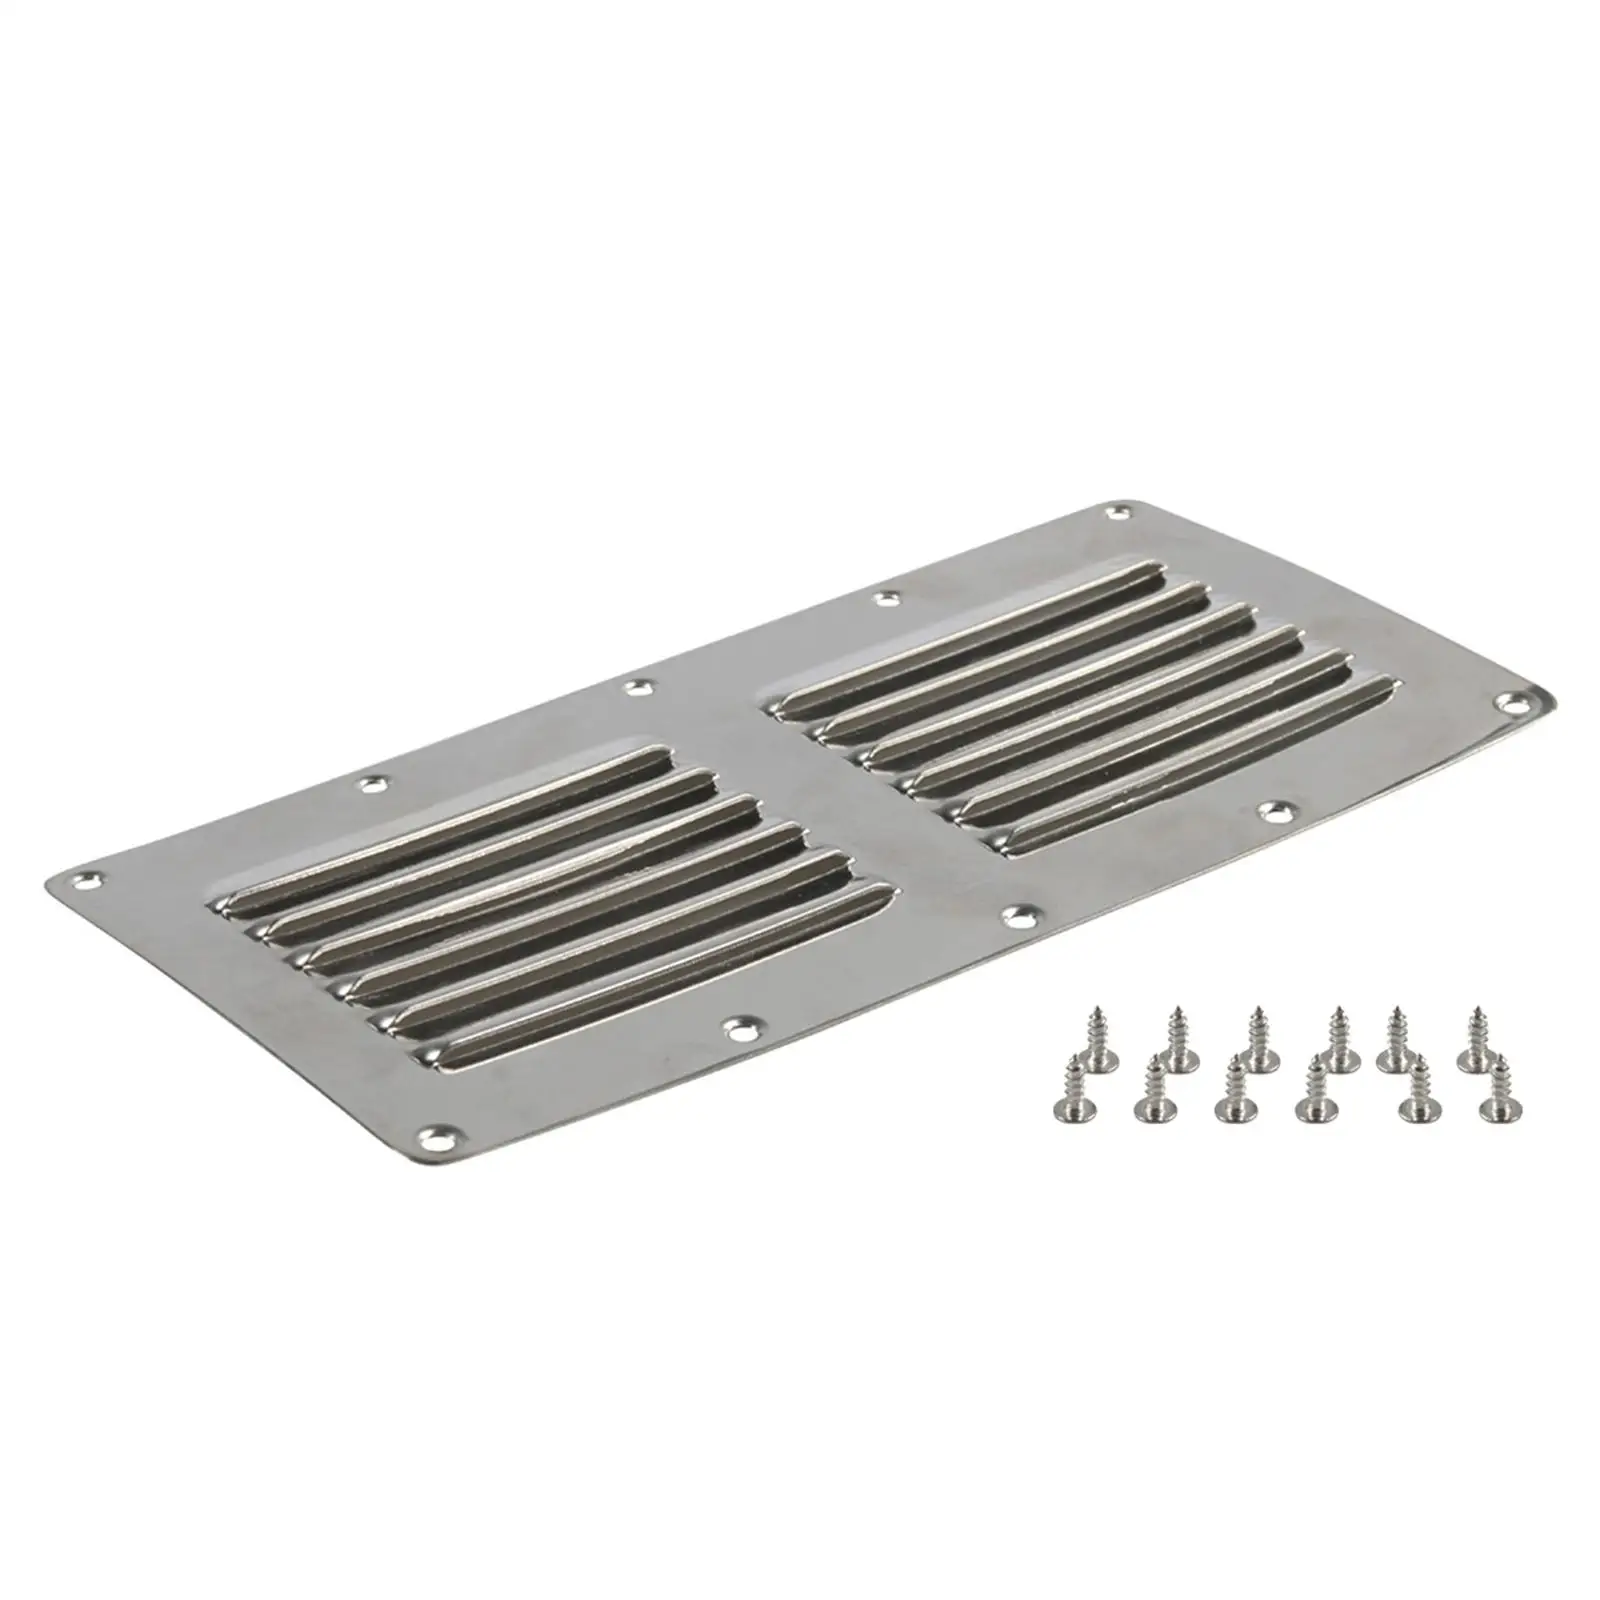 Marine Marine Vent 304 Stainless Steel for Hardware Fitting Boat Yacht